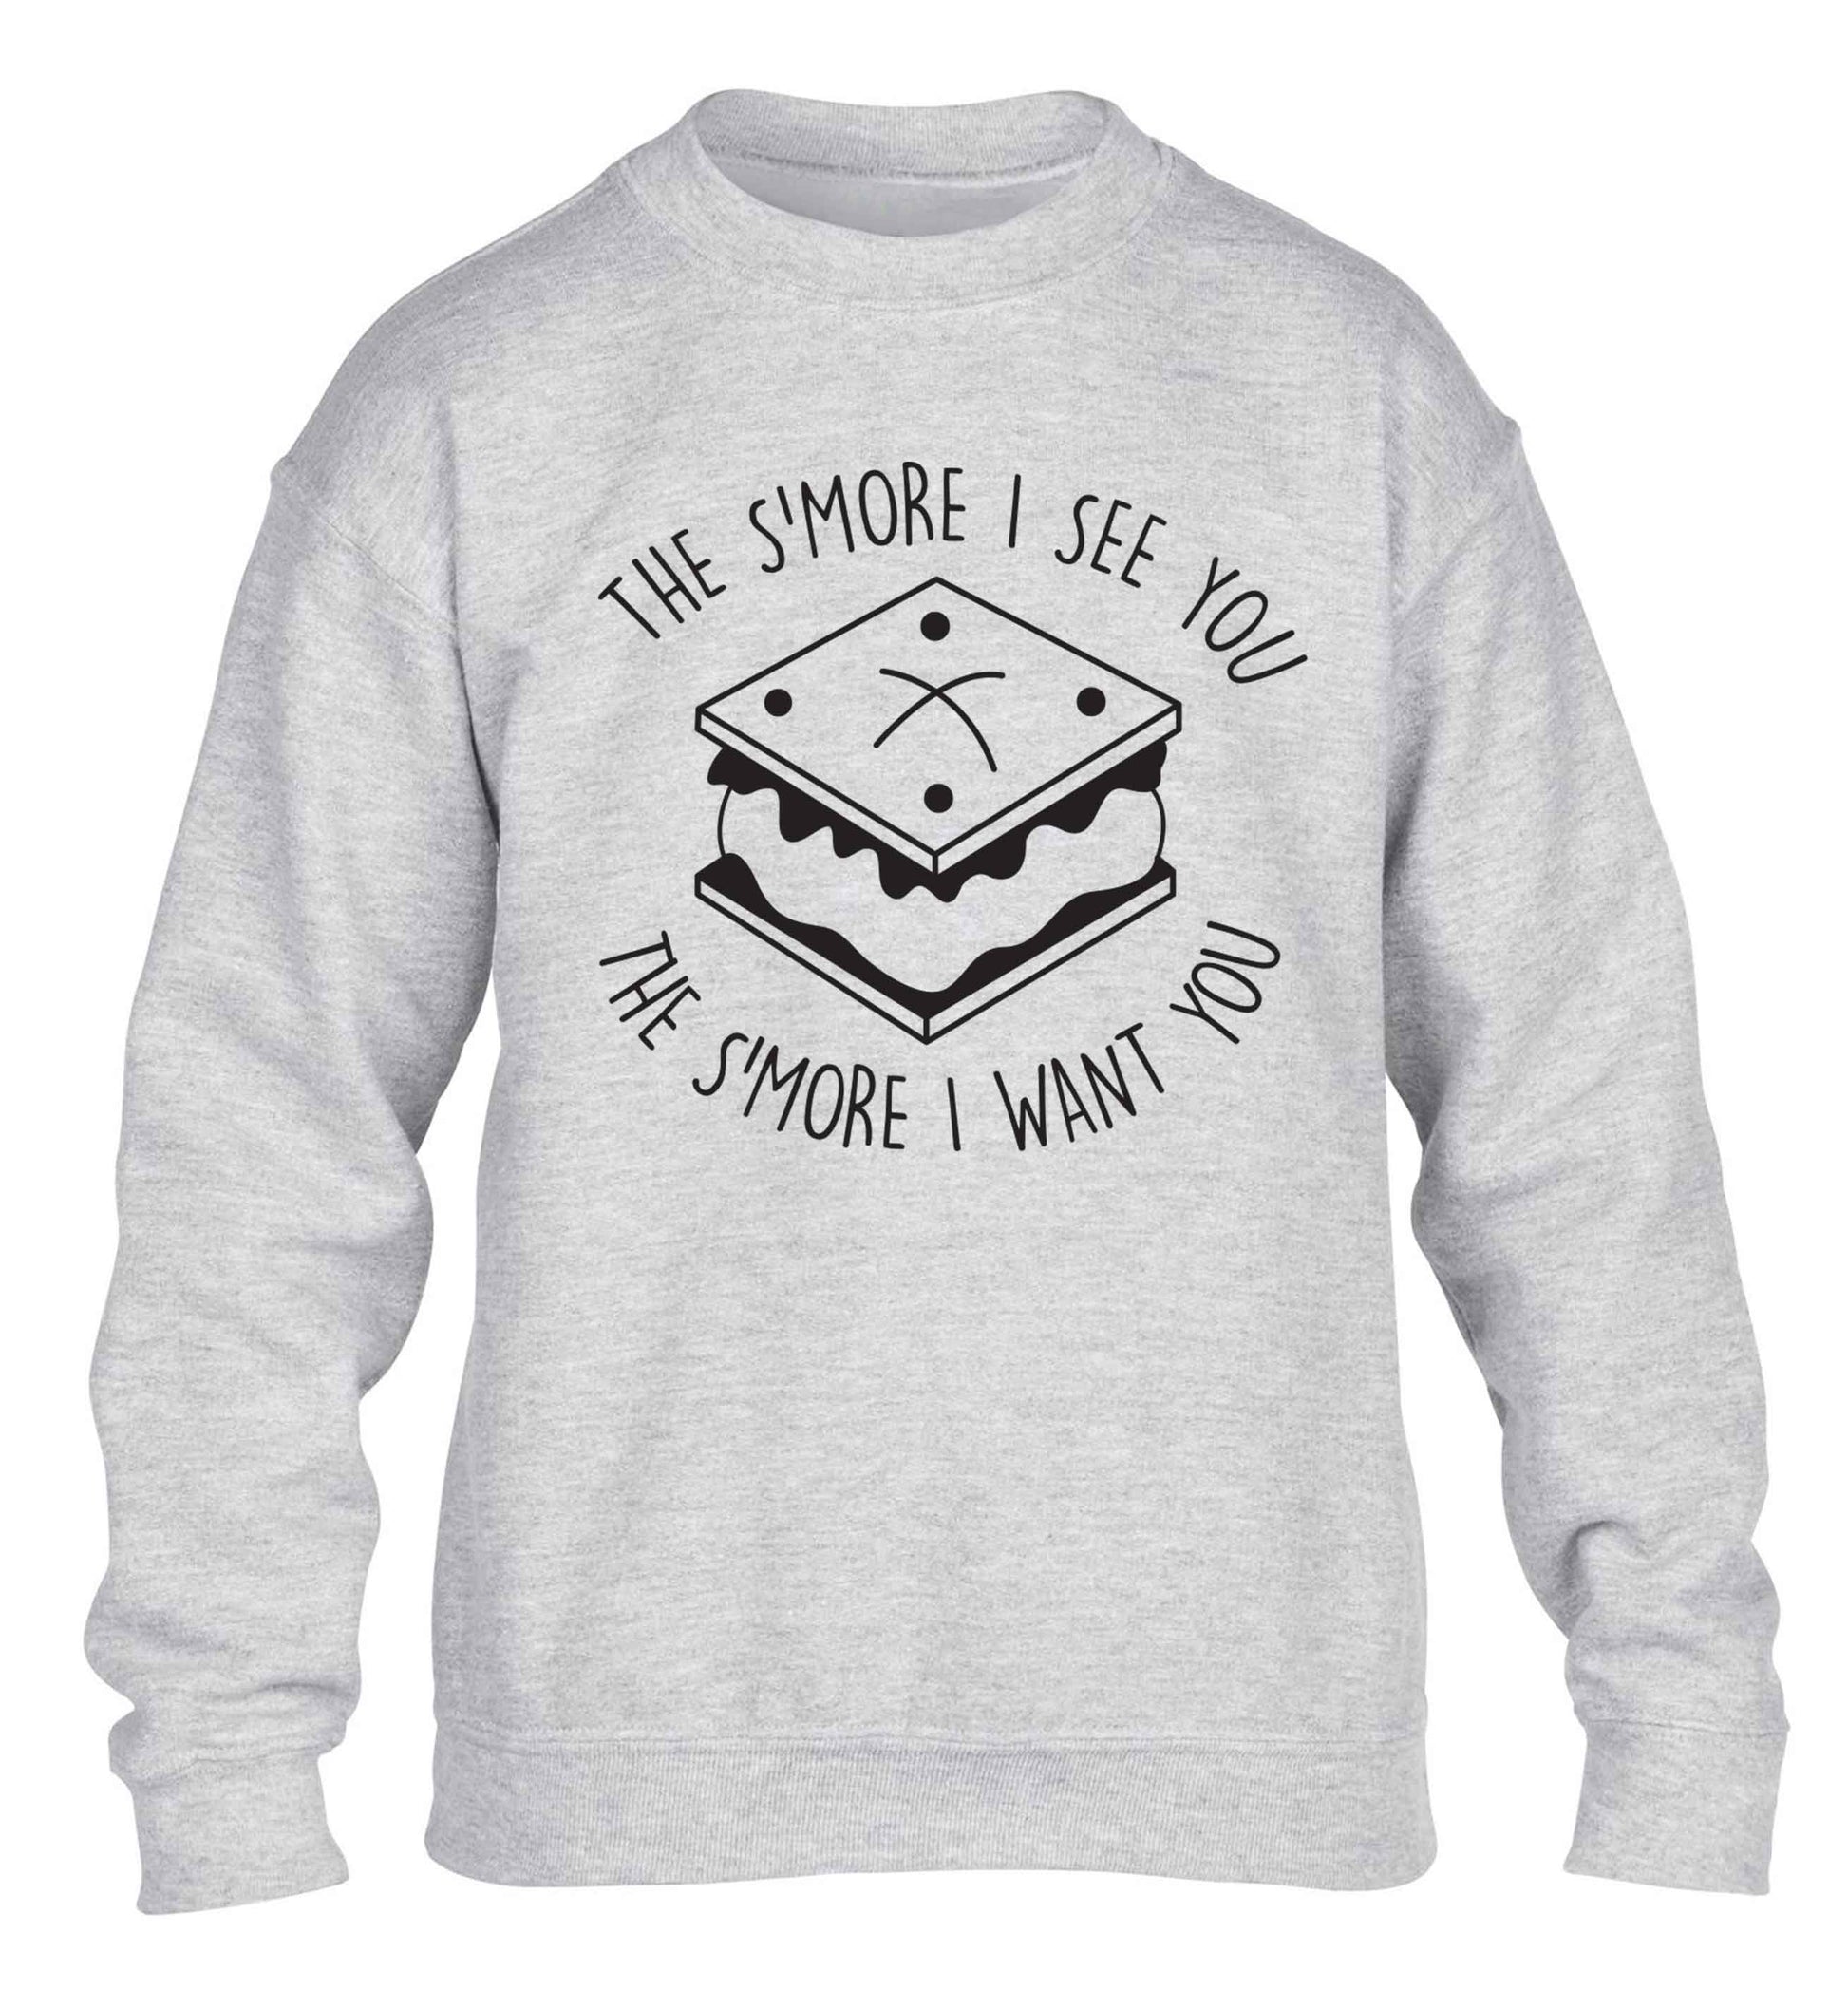 The s'more I see you the s'more I want you children's grey sweater 12-13 Years